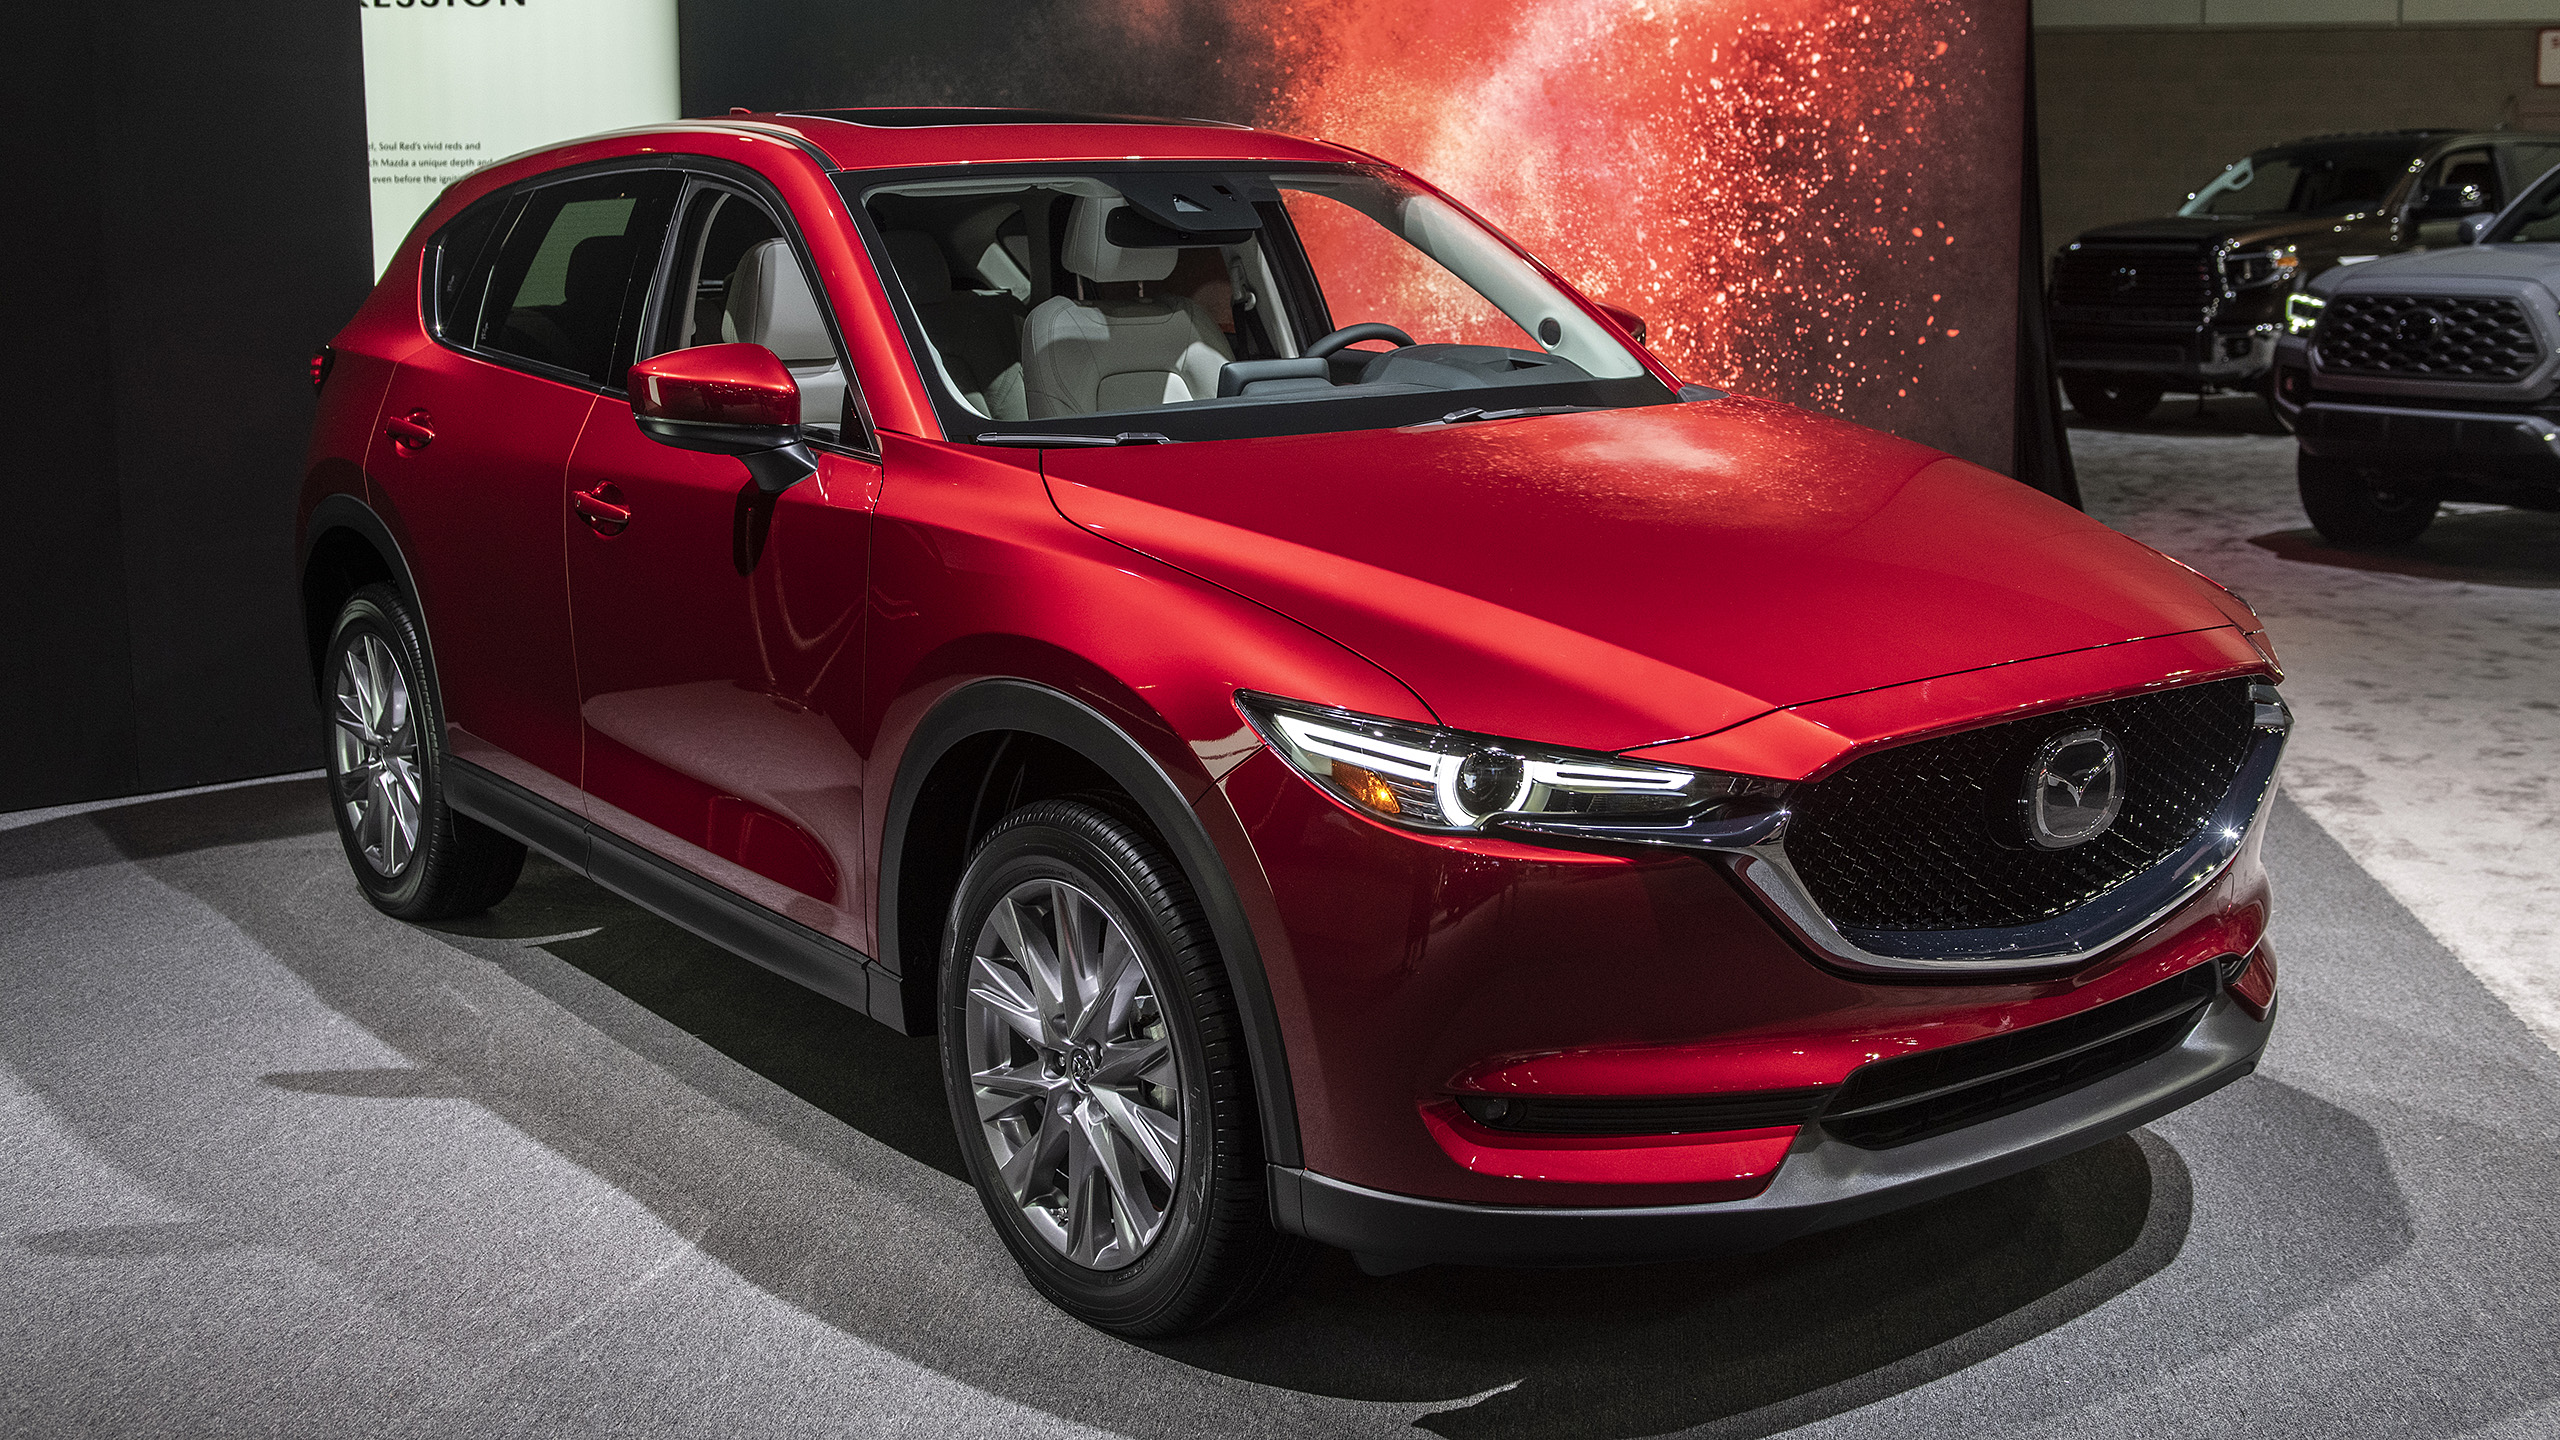 2020 Mazda CX-5 gets a light update with more power and a higher price